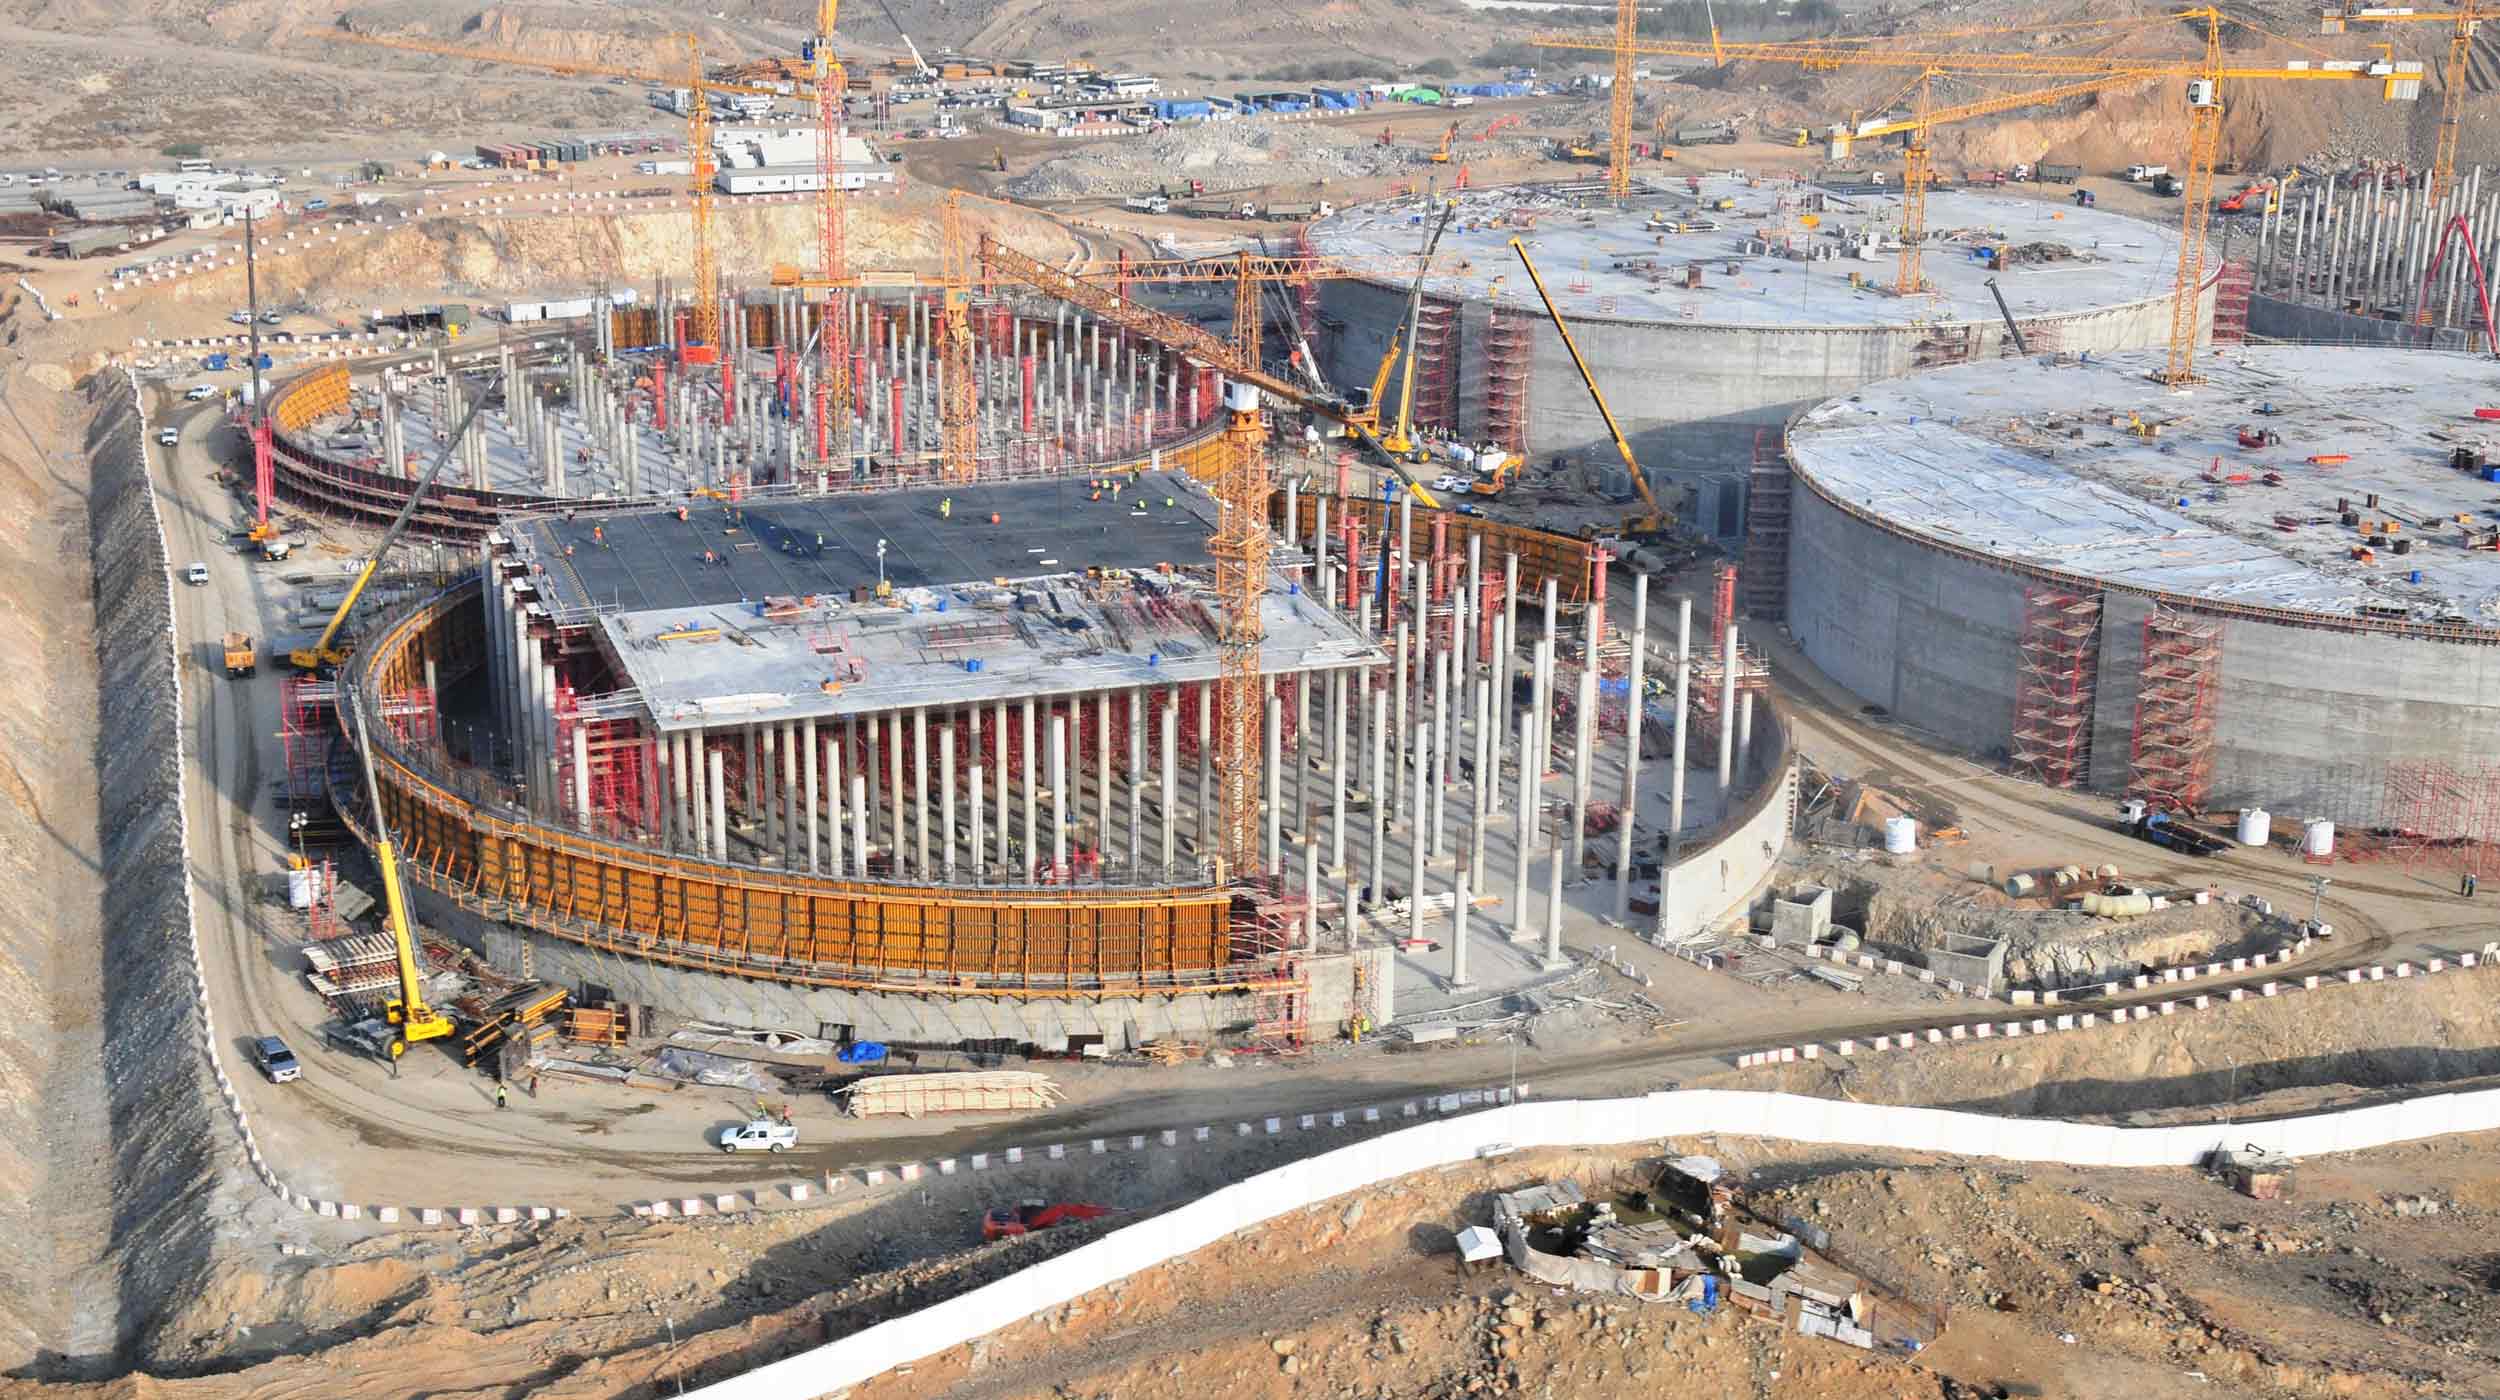 The strategic water storage project in Jeddah is the largest of its kind built in Saudi Arabia to date.